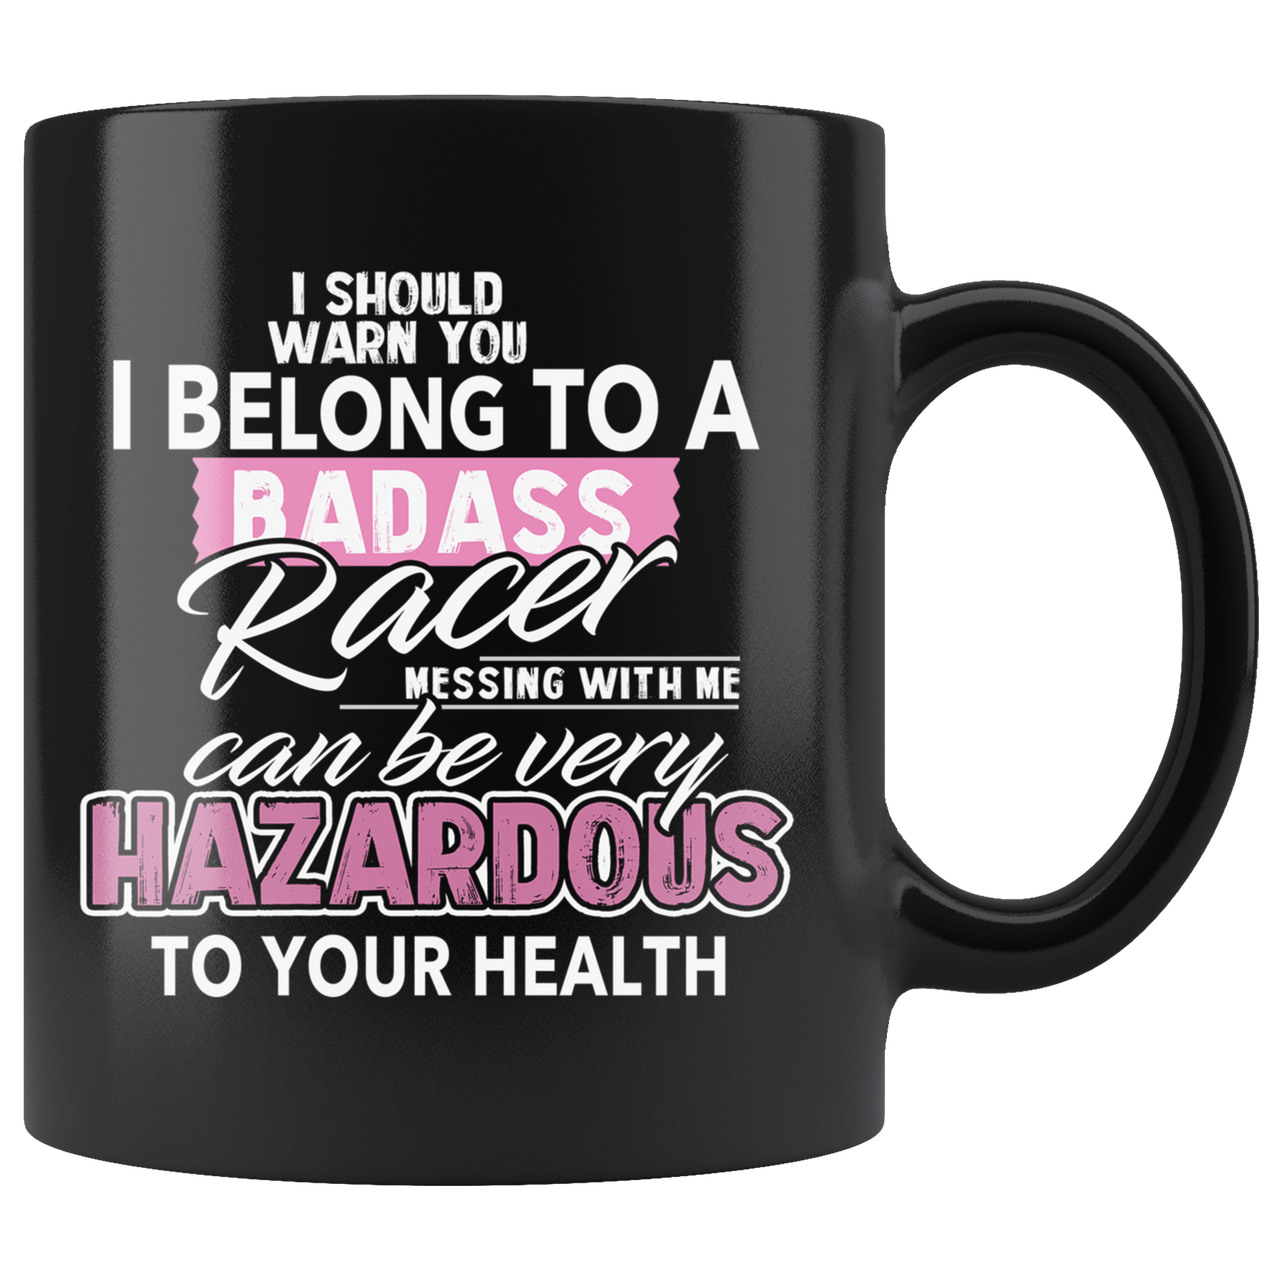 I Should Warn You I Belong To A Badass Racer Messing With Me Can Be Very Hazardous For Your Health Mug!